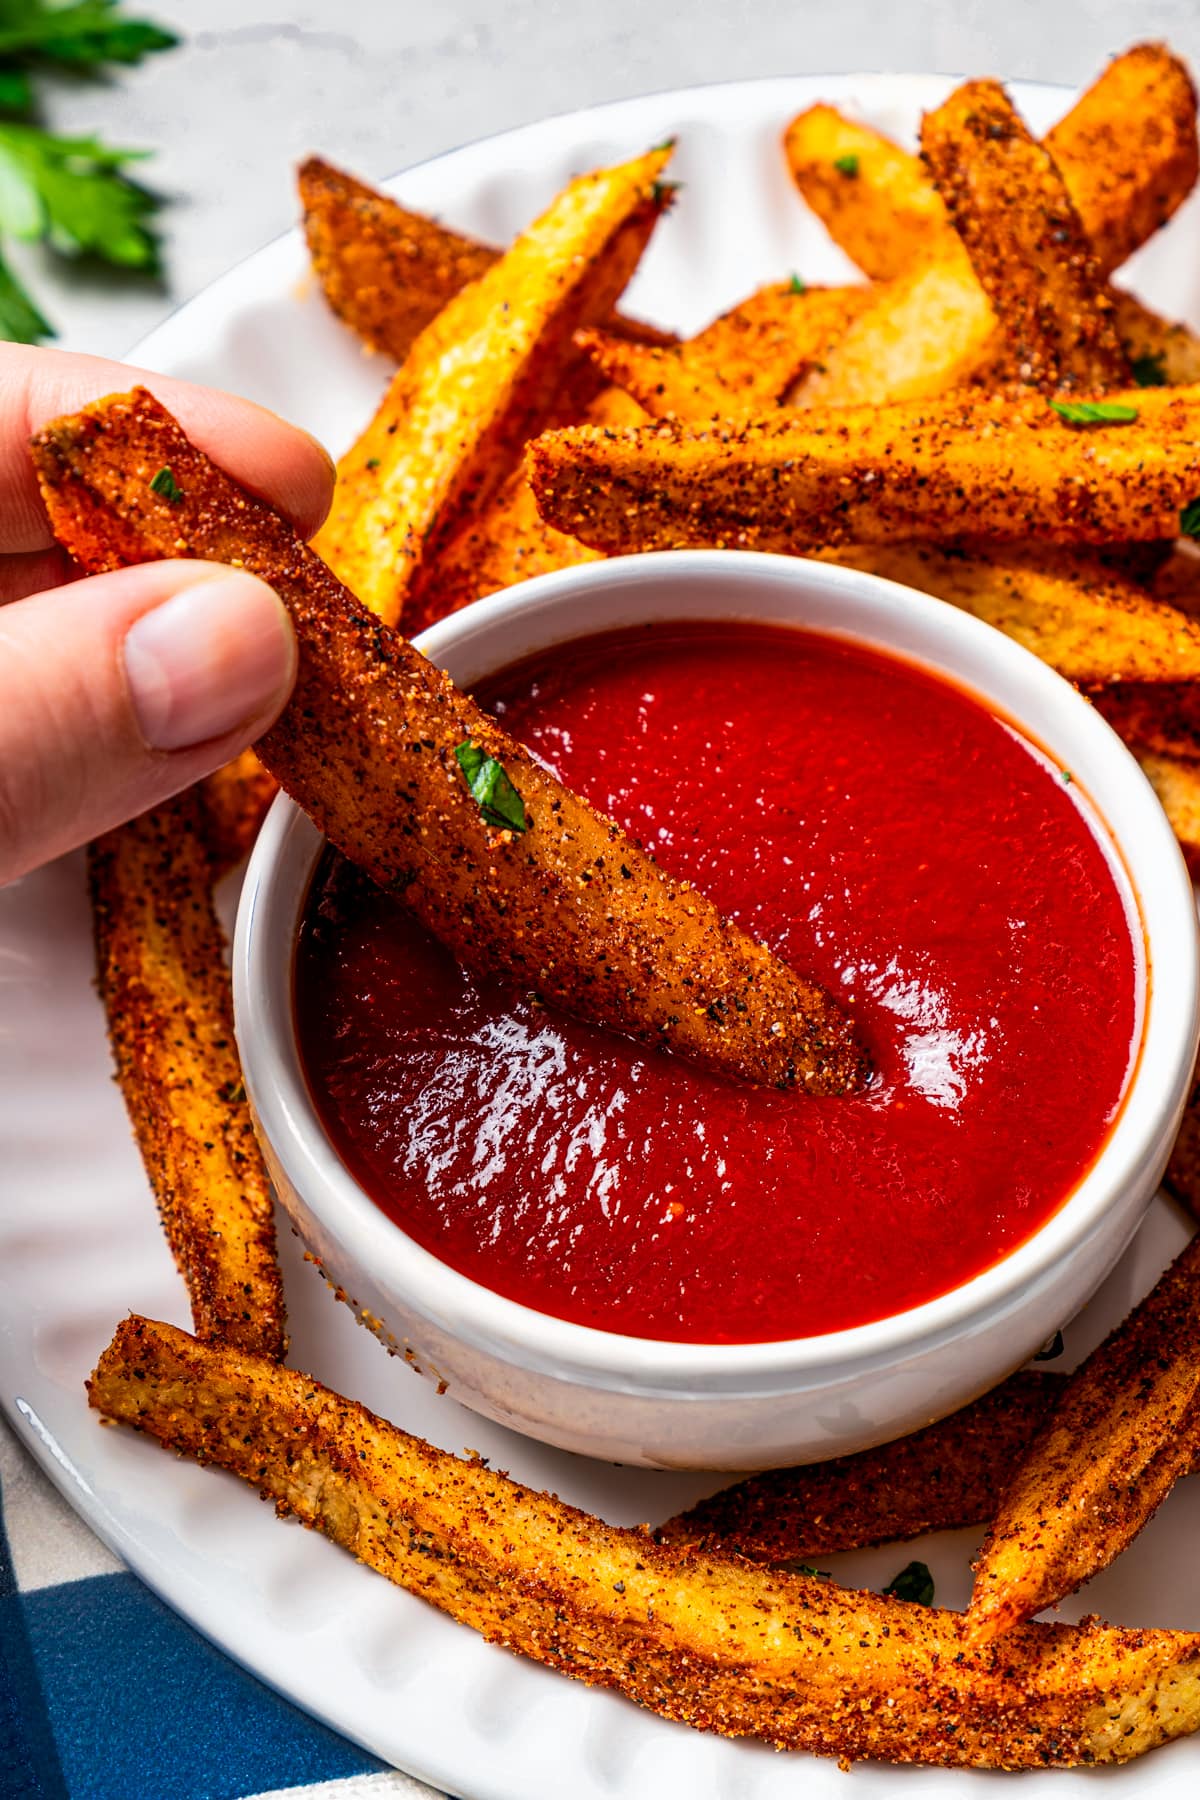 A hand dipping a Cajun fry in ketchup.